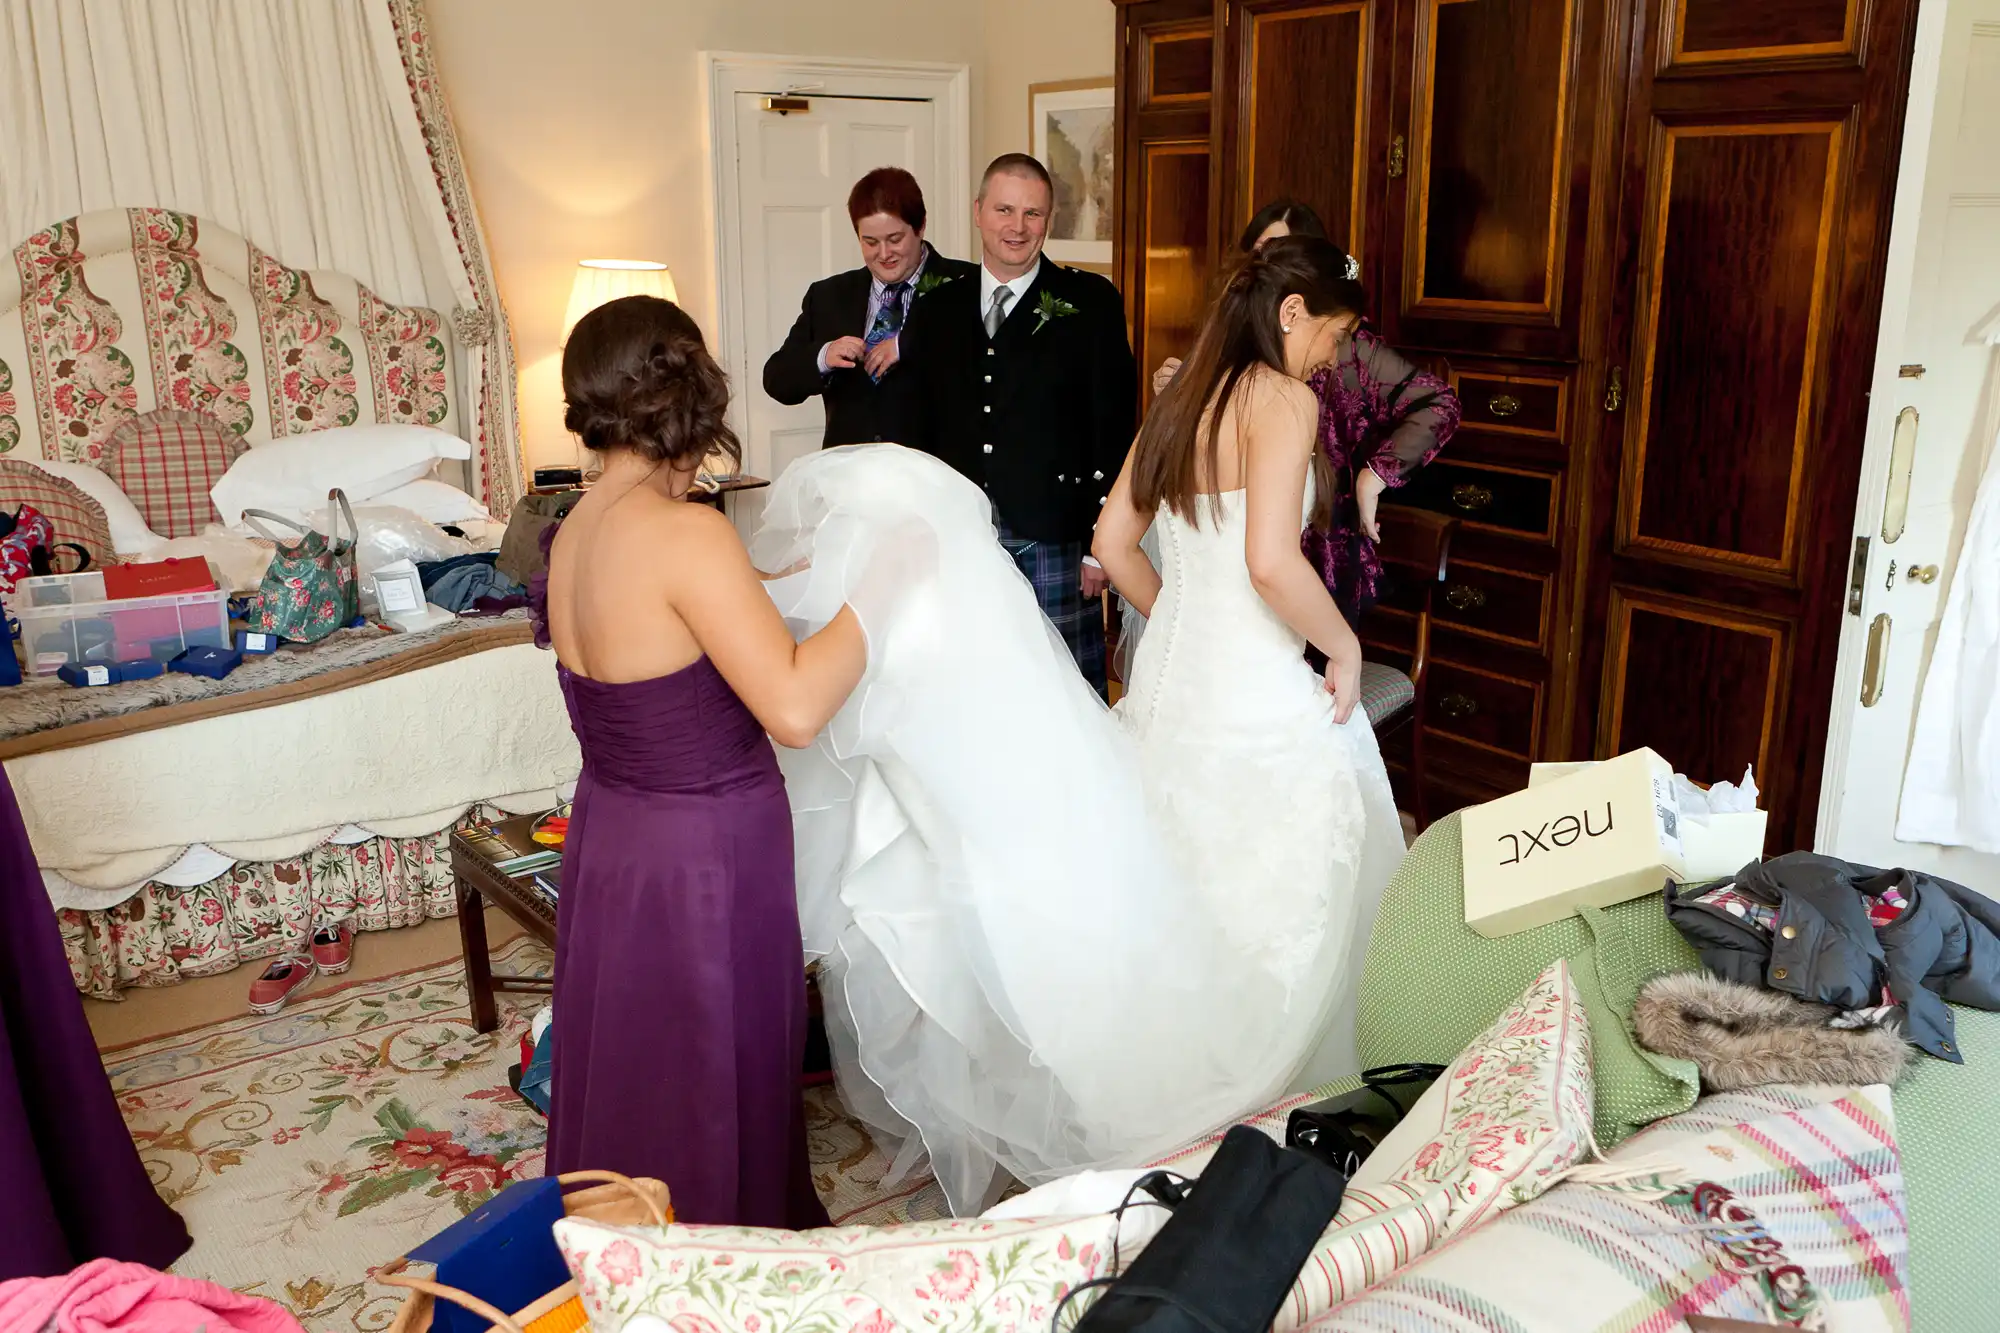 A bride in a white gown is helped by two women in a cluttered room, with a man in a kilt smiling in the background.